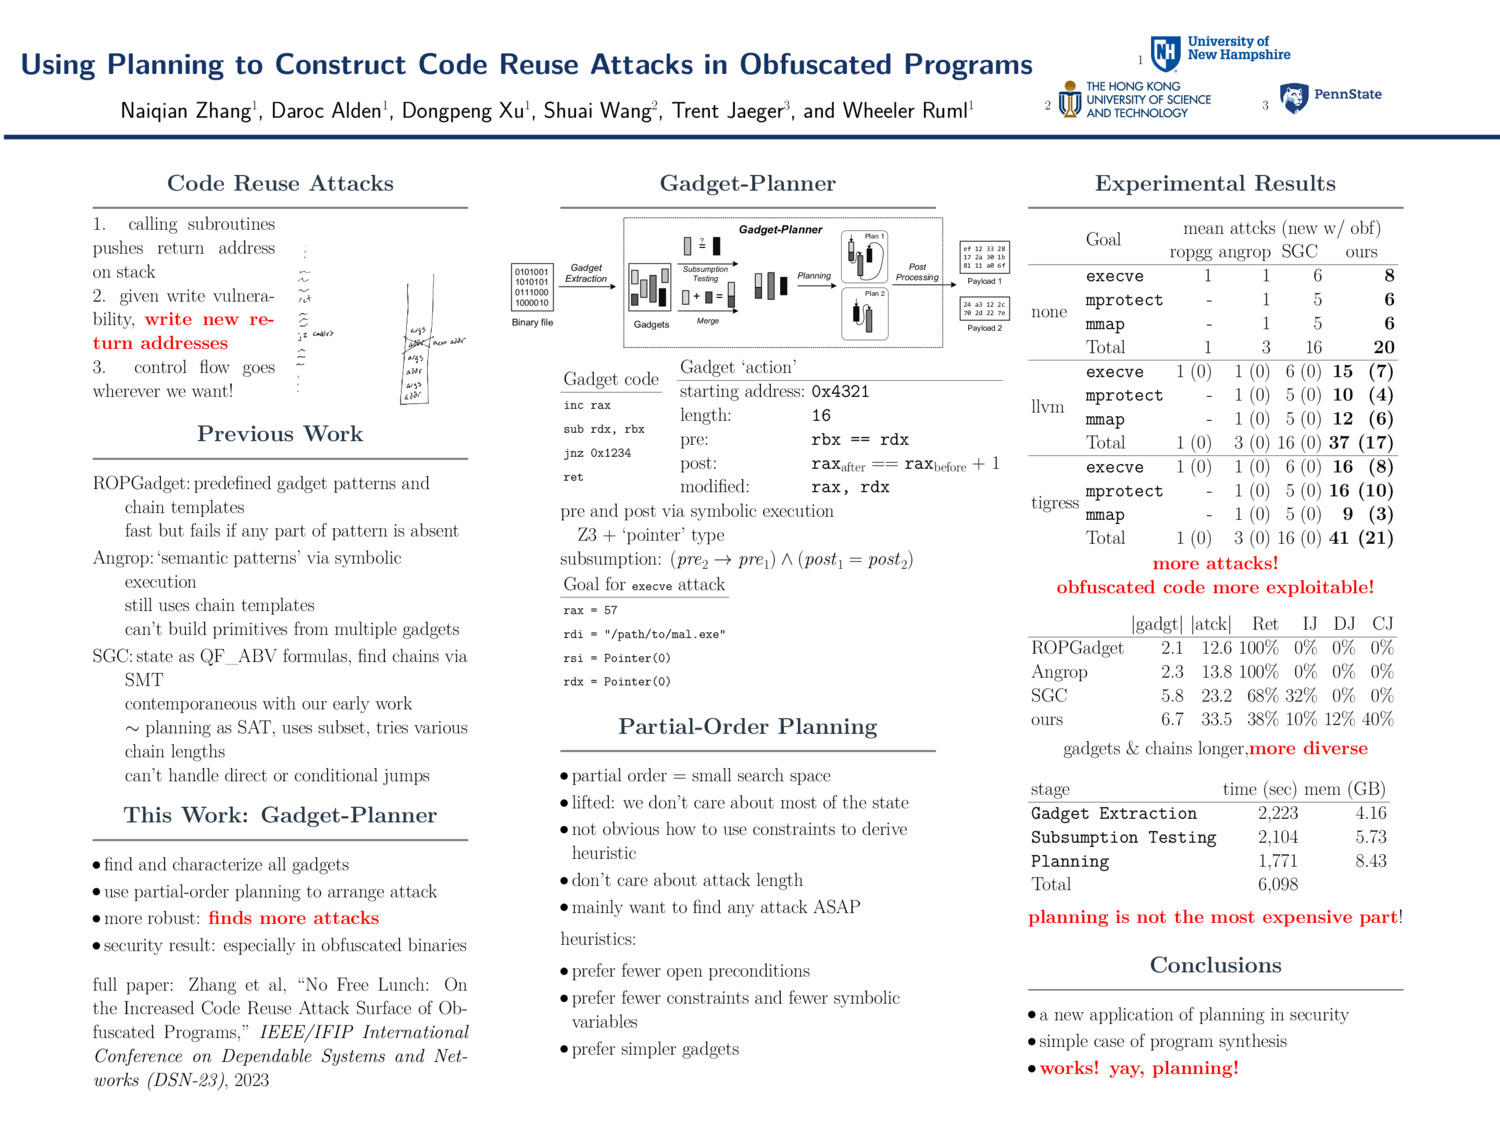 Using Planning To Construct Code Reuse Attacks In Obfuscated Programs by ruml